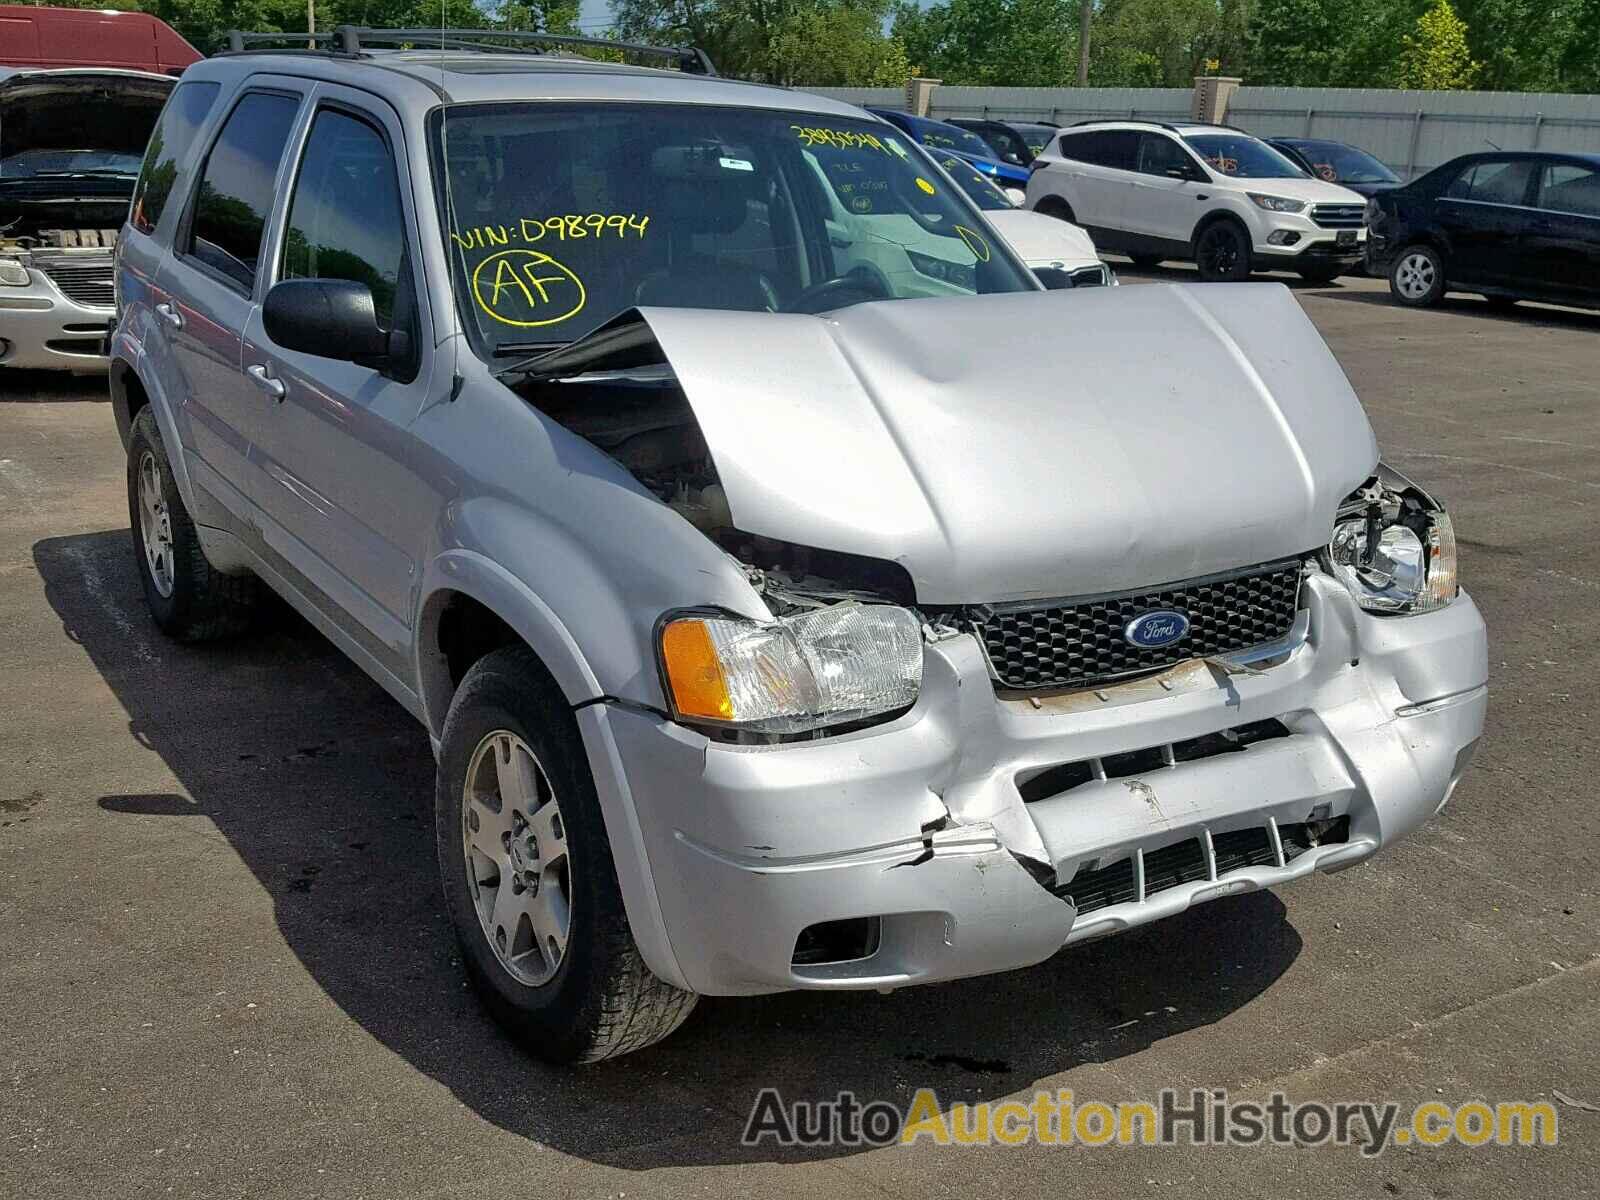 2003 FORD ESCAPE LIMITED, 1FMCU94113KD98994